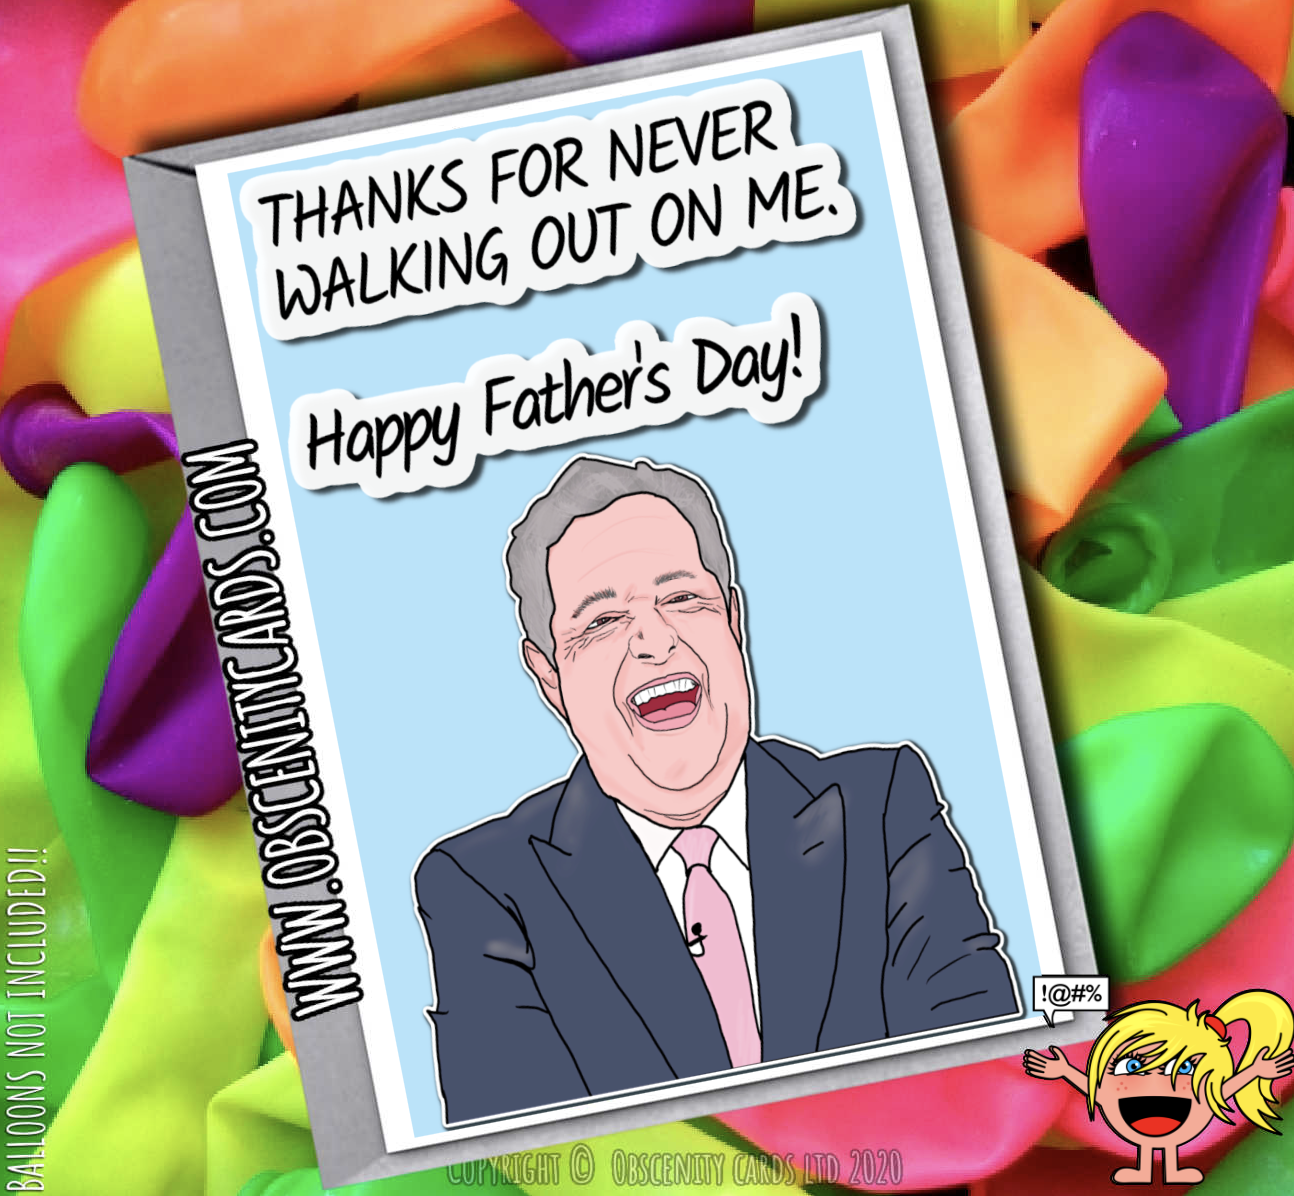 THANKS FOR NEVER WALKING OUT ON ME PIERS MORGAN FATHER'S DAY CARD